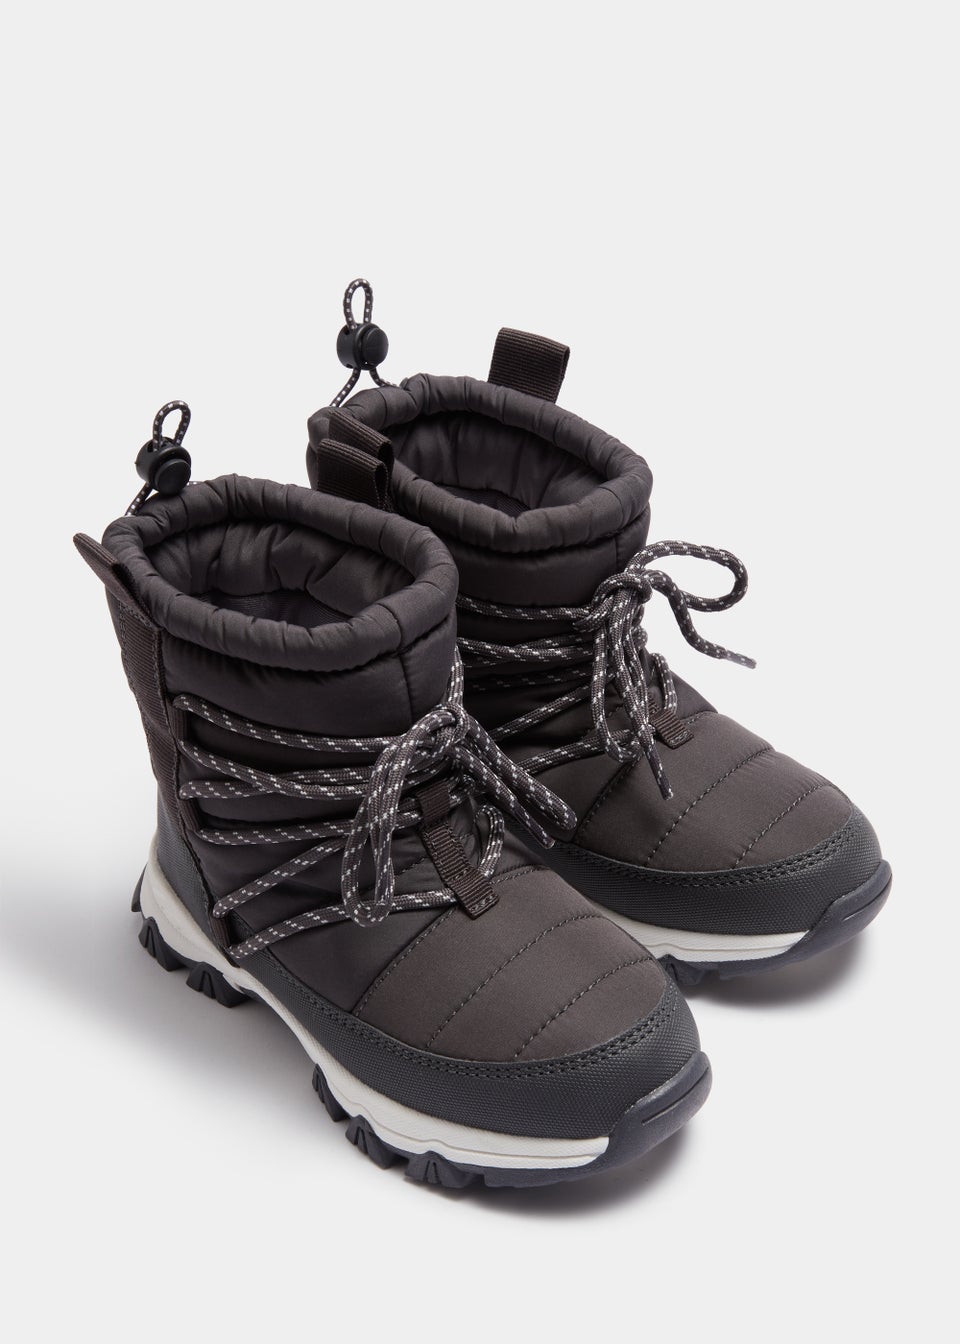 Boys Charcoal Snow Boots (Younger 8-Older 2)